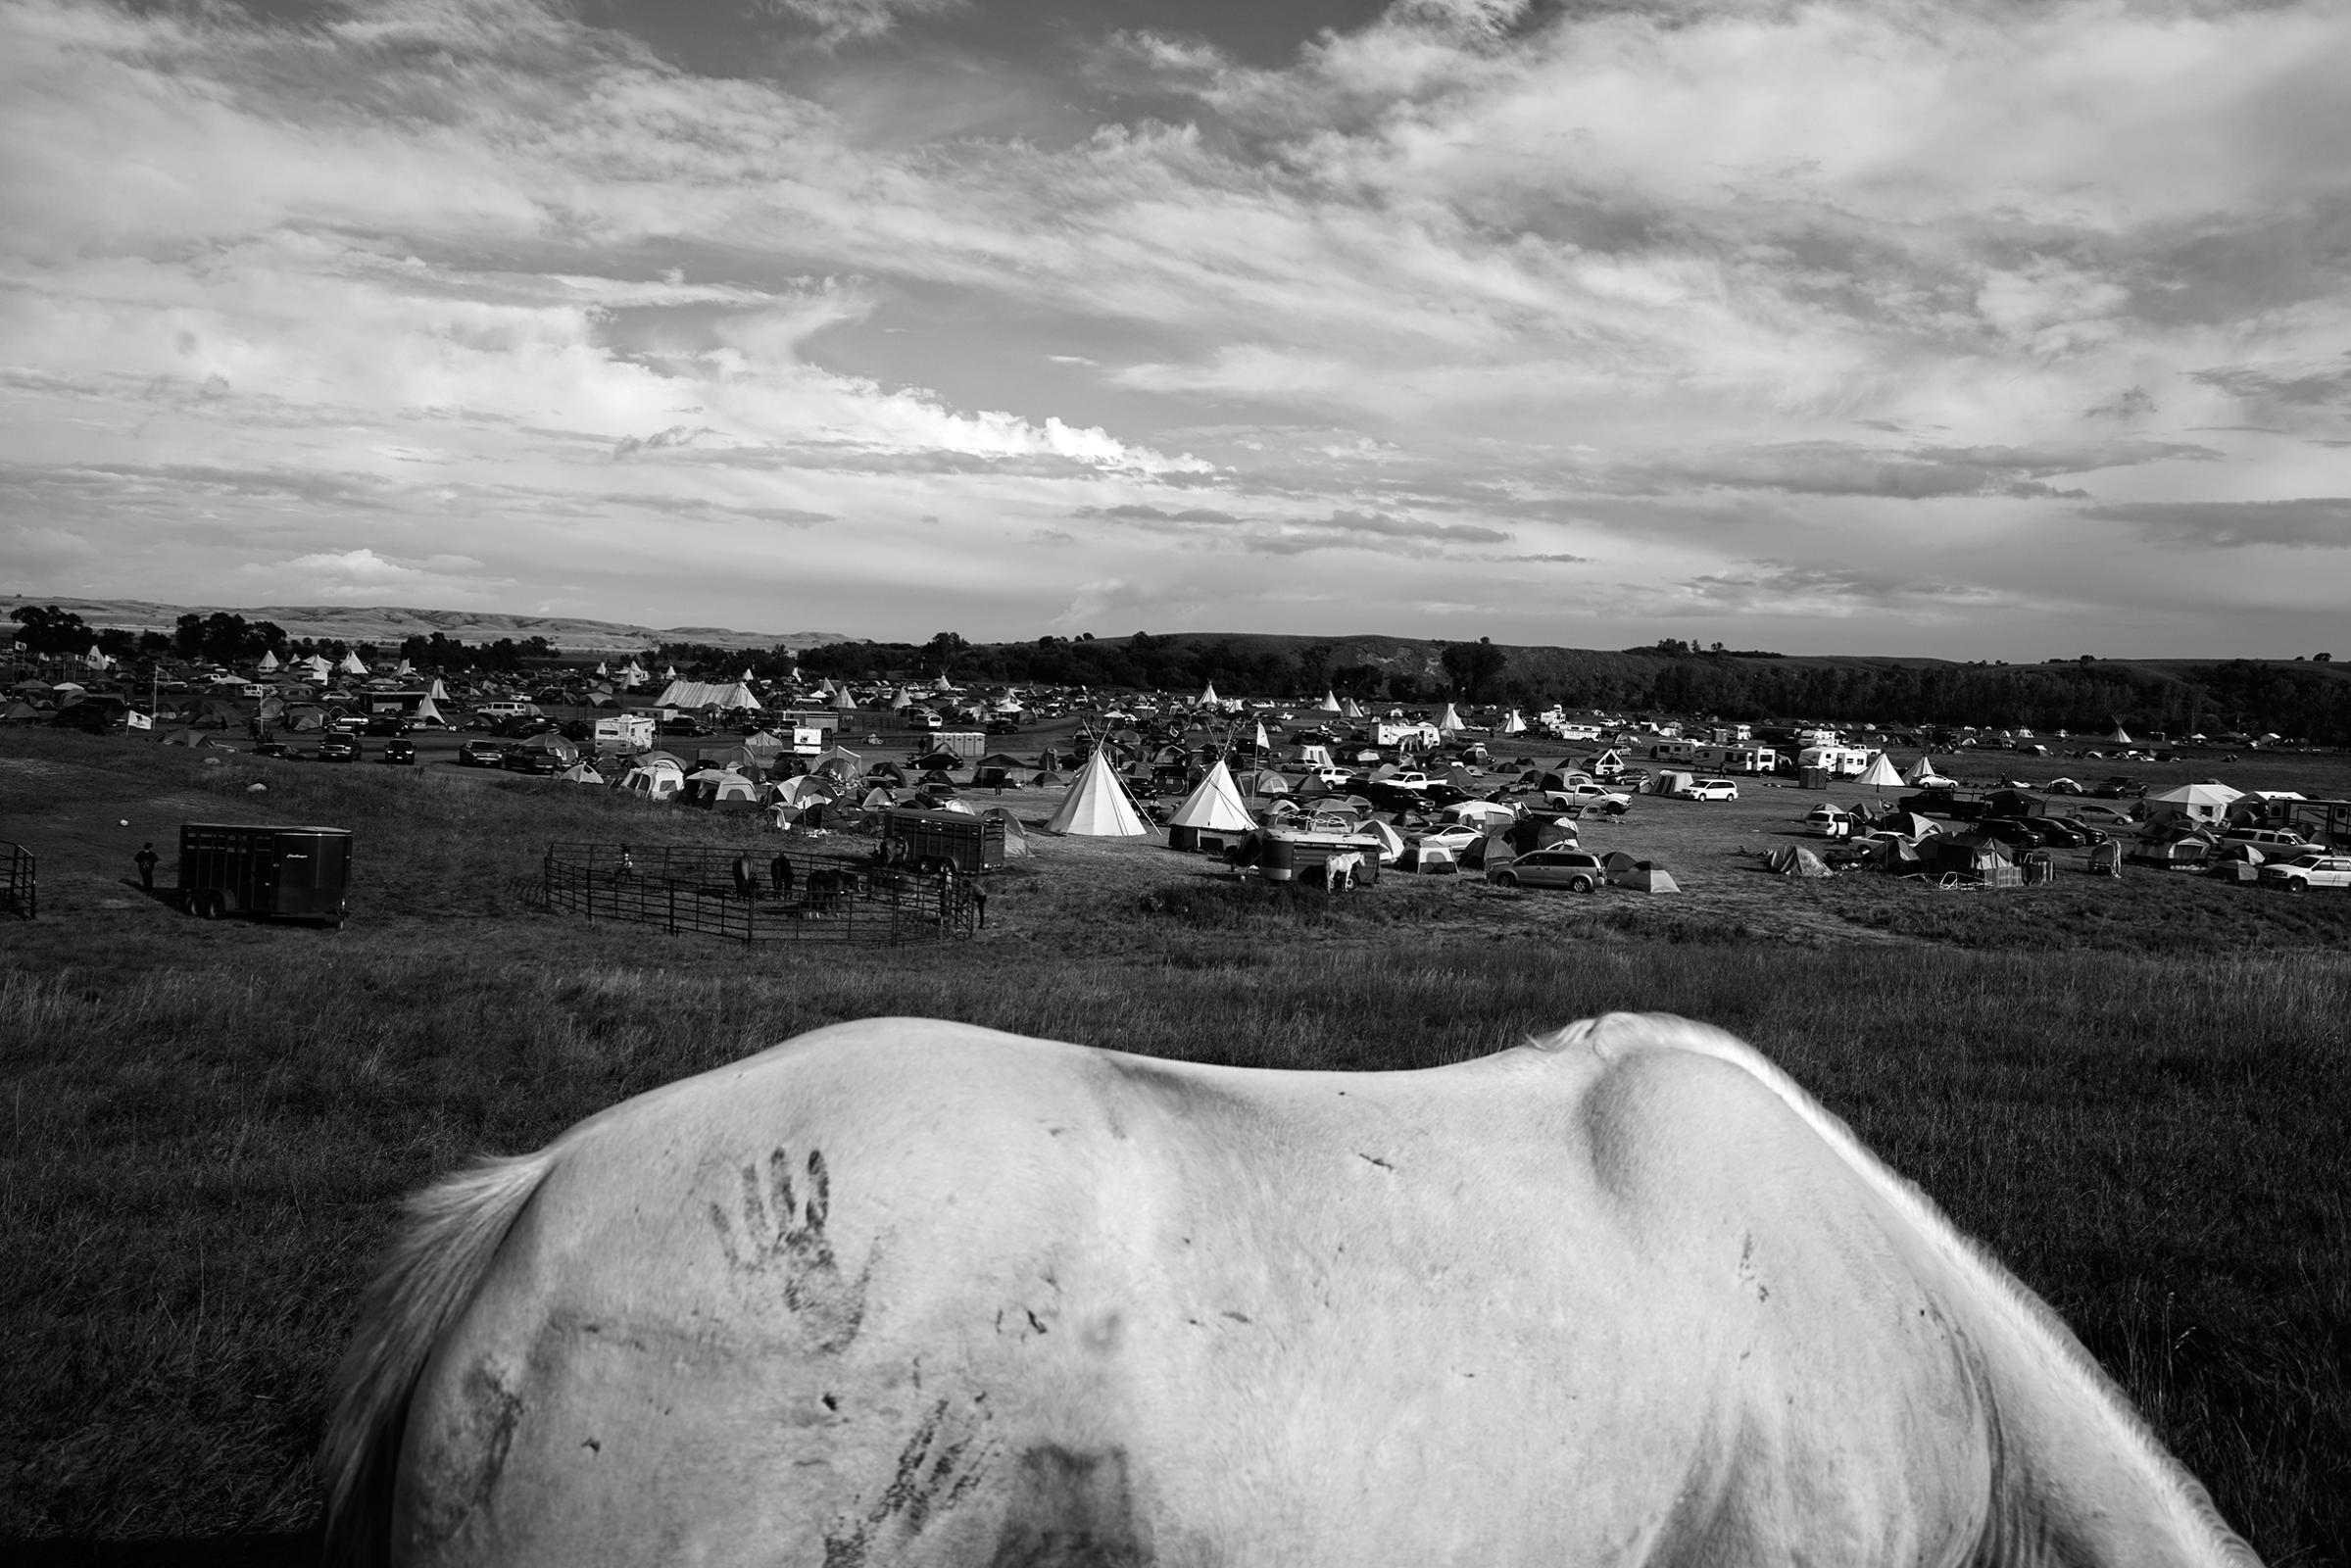 protest-cannon-ball-north-dakota-sioux-protest-camp-larry-towell-magnum